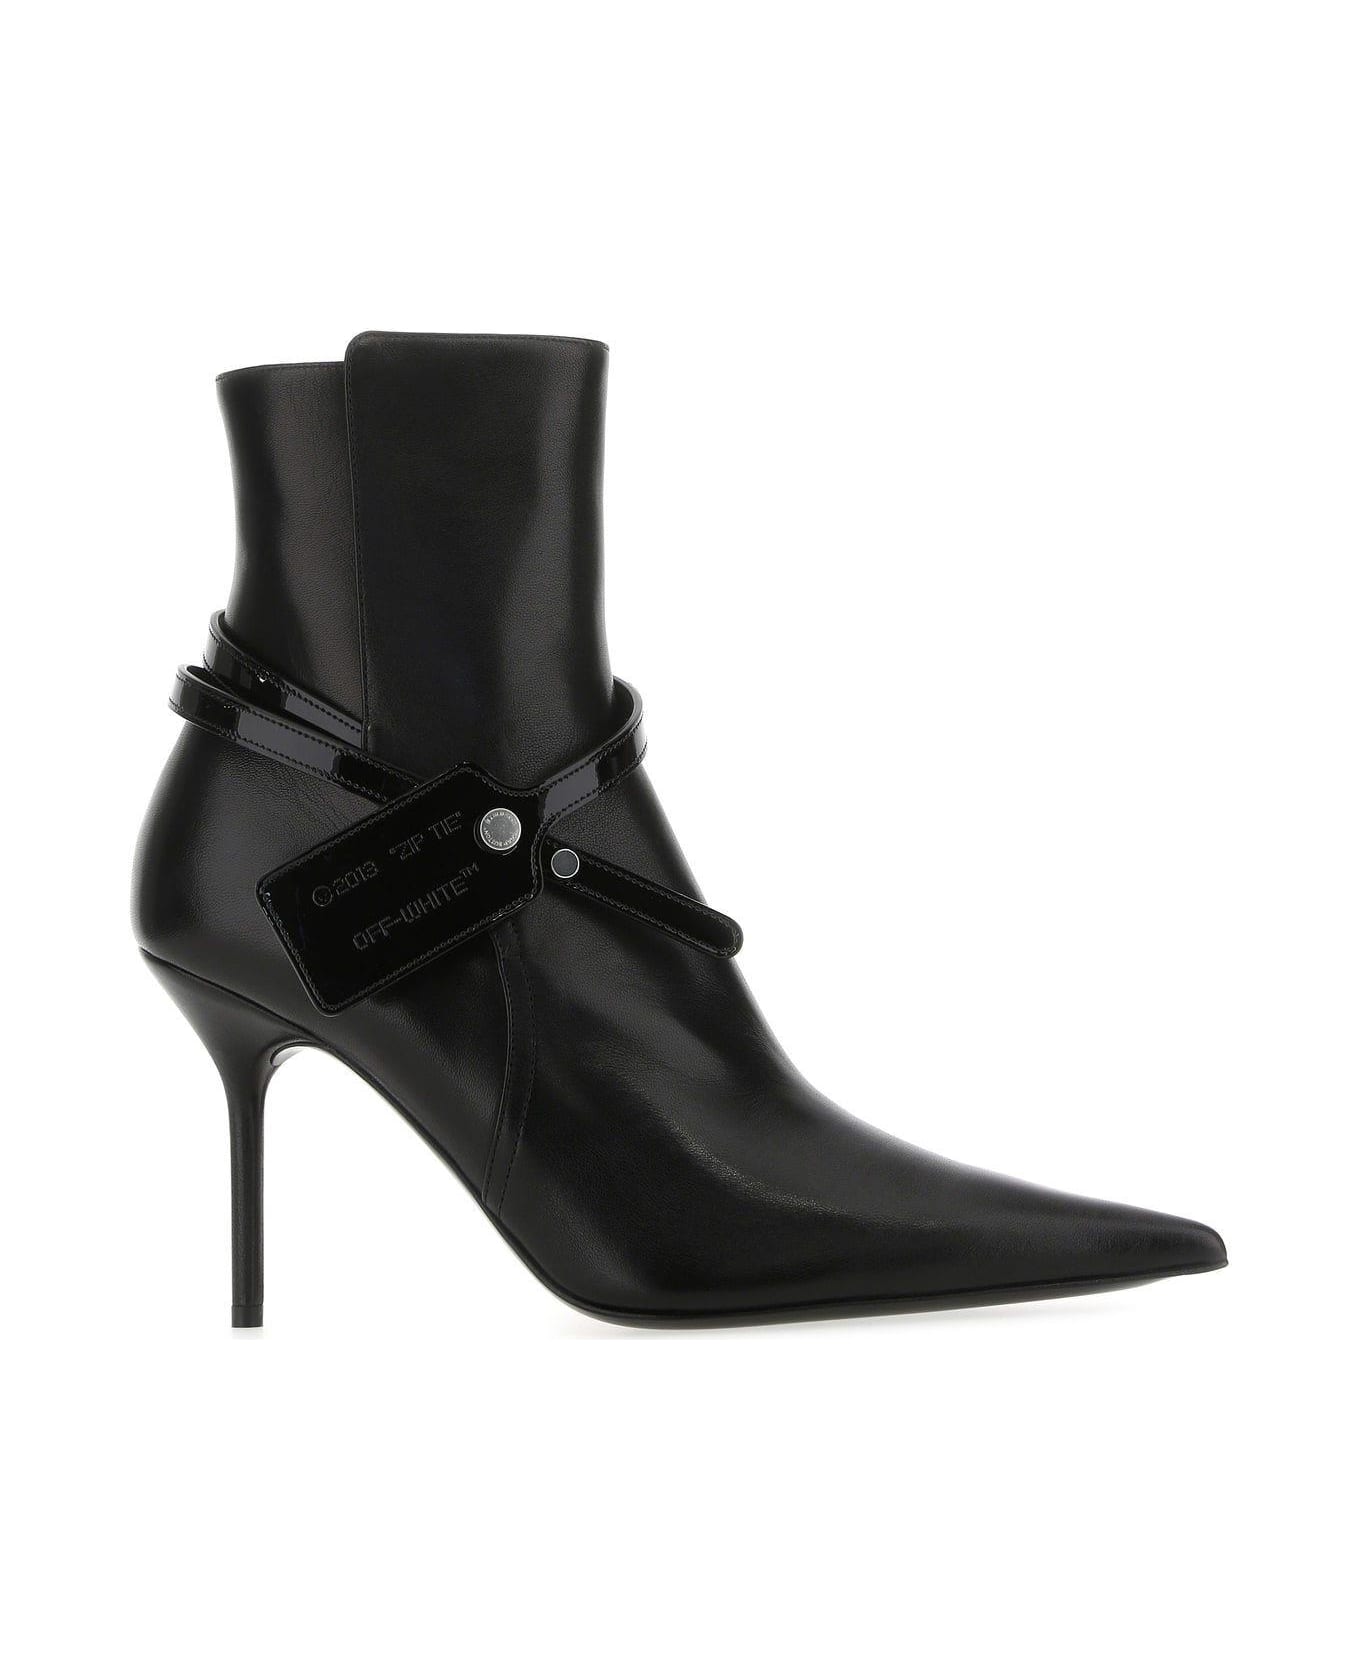 Off-White Black Leather Ankle Boots - Black ブーツ